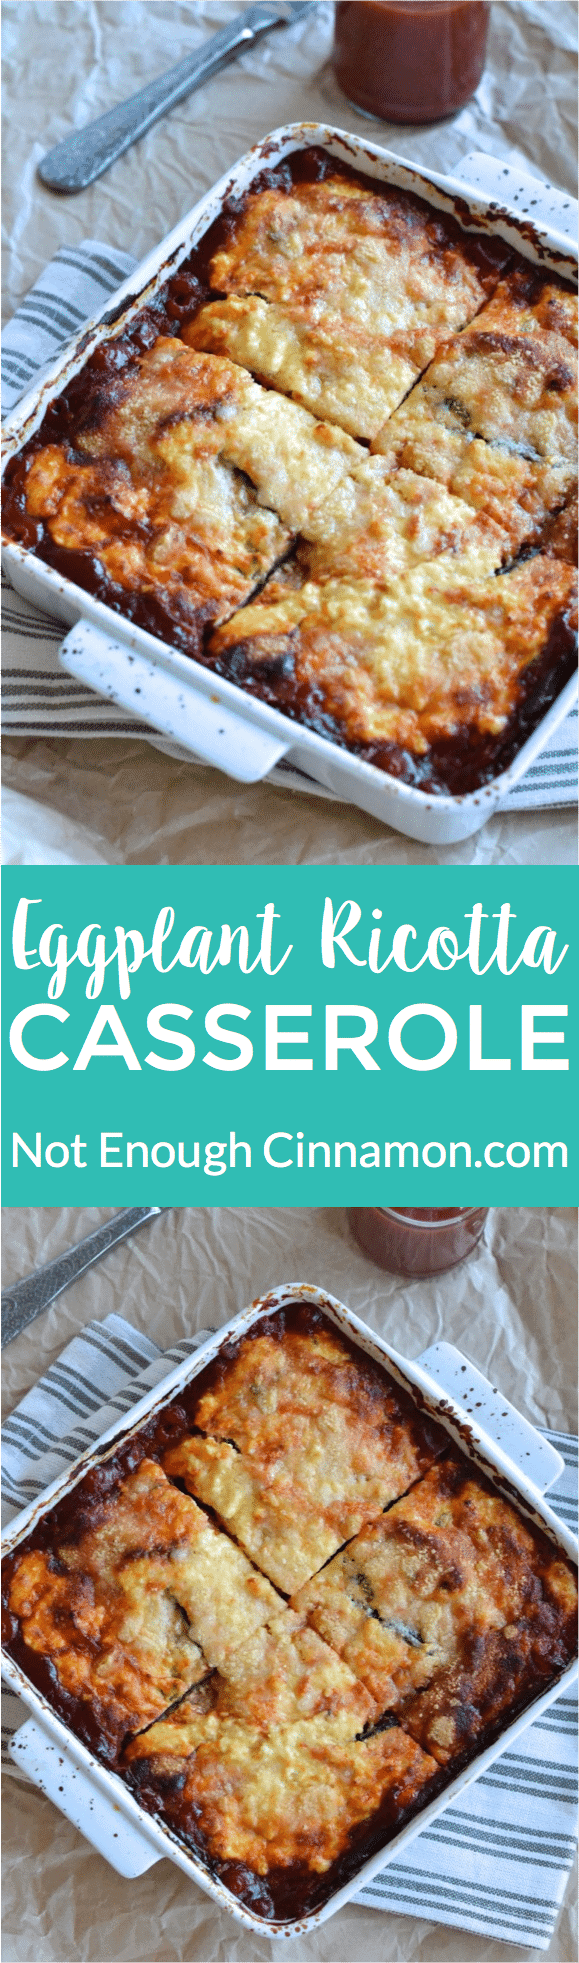 Perfect as a side dish or a meatless main dish, this Eggplant Ricotta Casserole is loaded with cheese and absolutely delicious! - Find the recipe on NotEnoughCinnamon.com